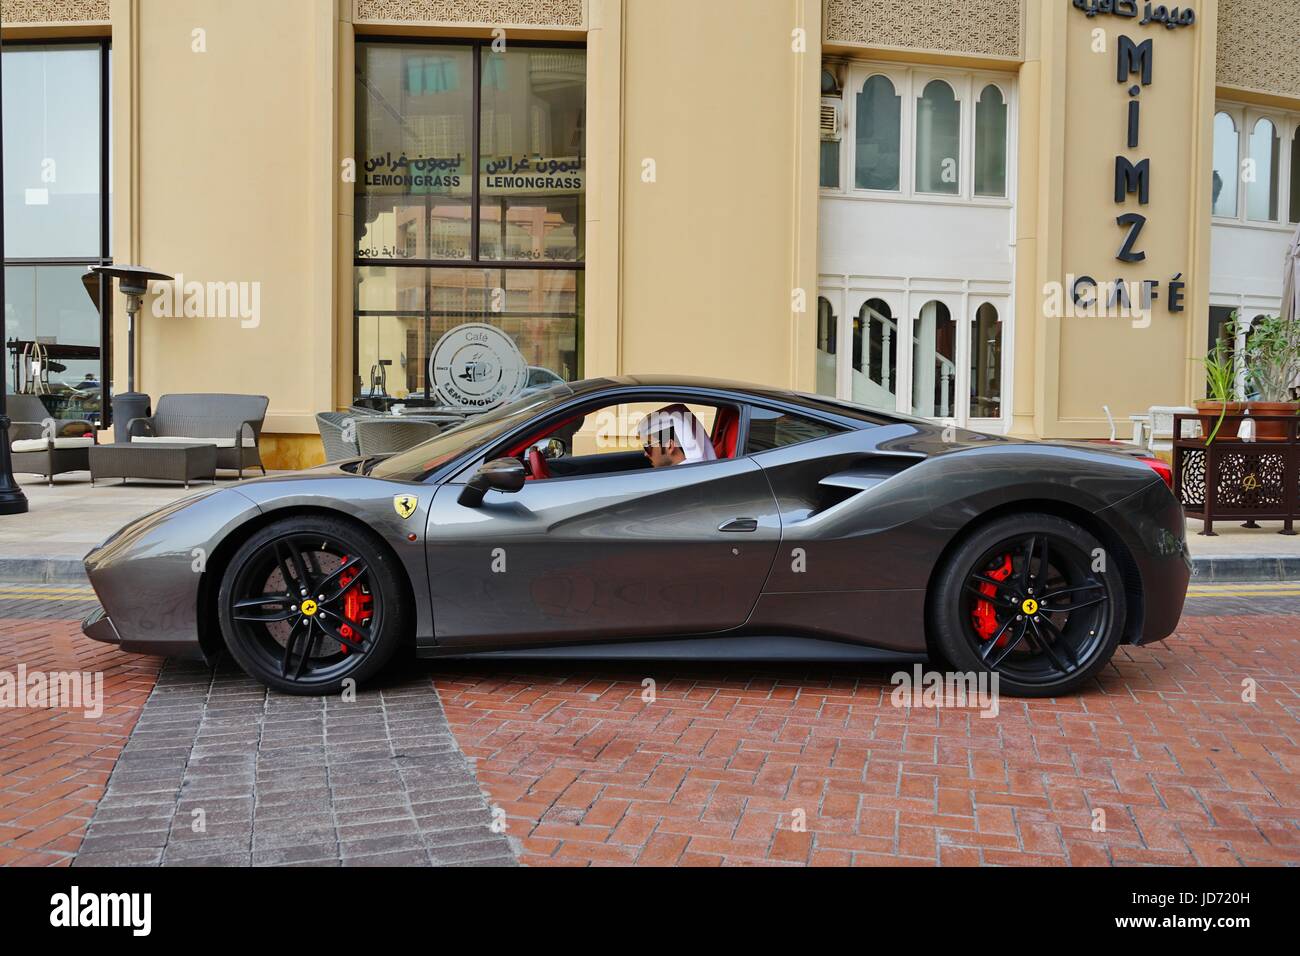 A young man in traditional Qatari outfit checks his cell phone inside his Ferrari sports car in front of a restaurant in Doha, the capital of Qatar Stock Photo